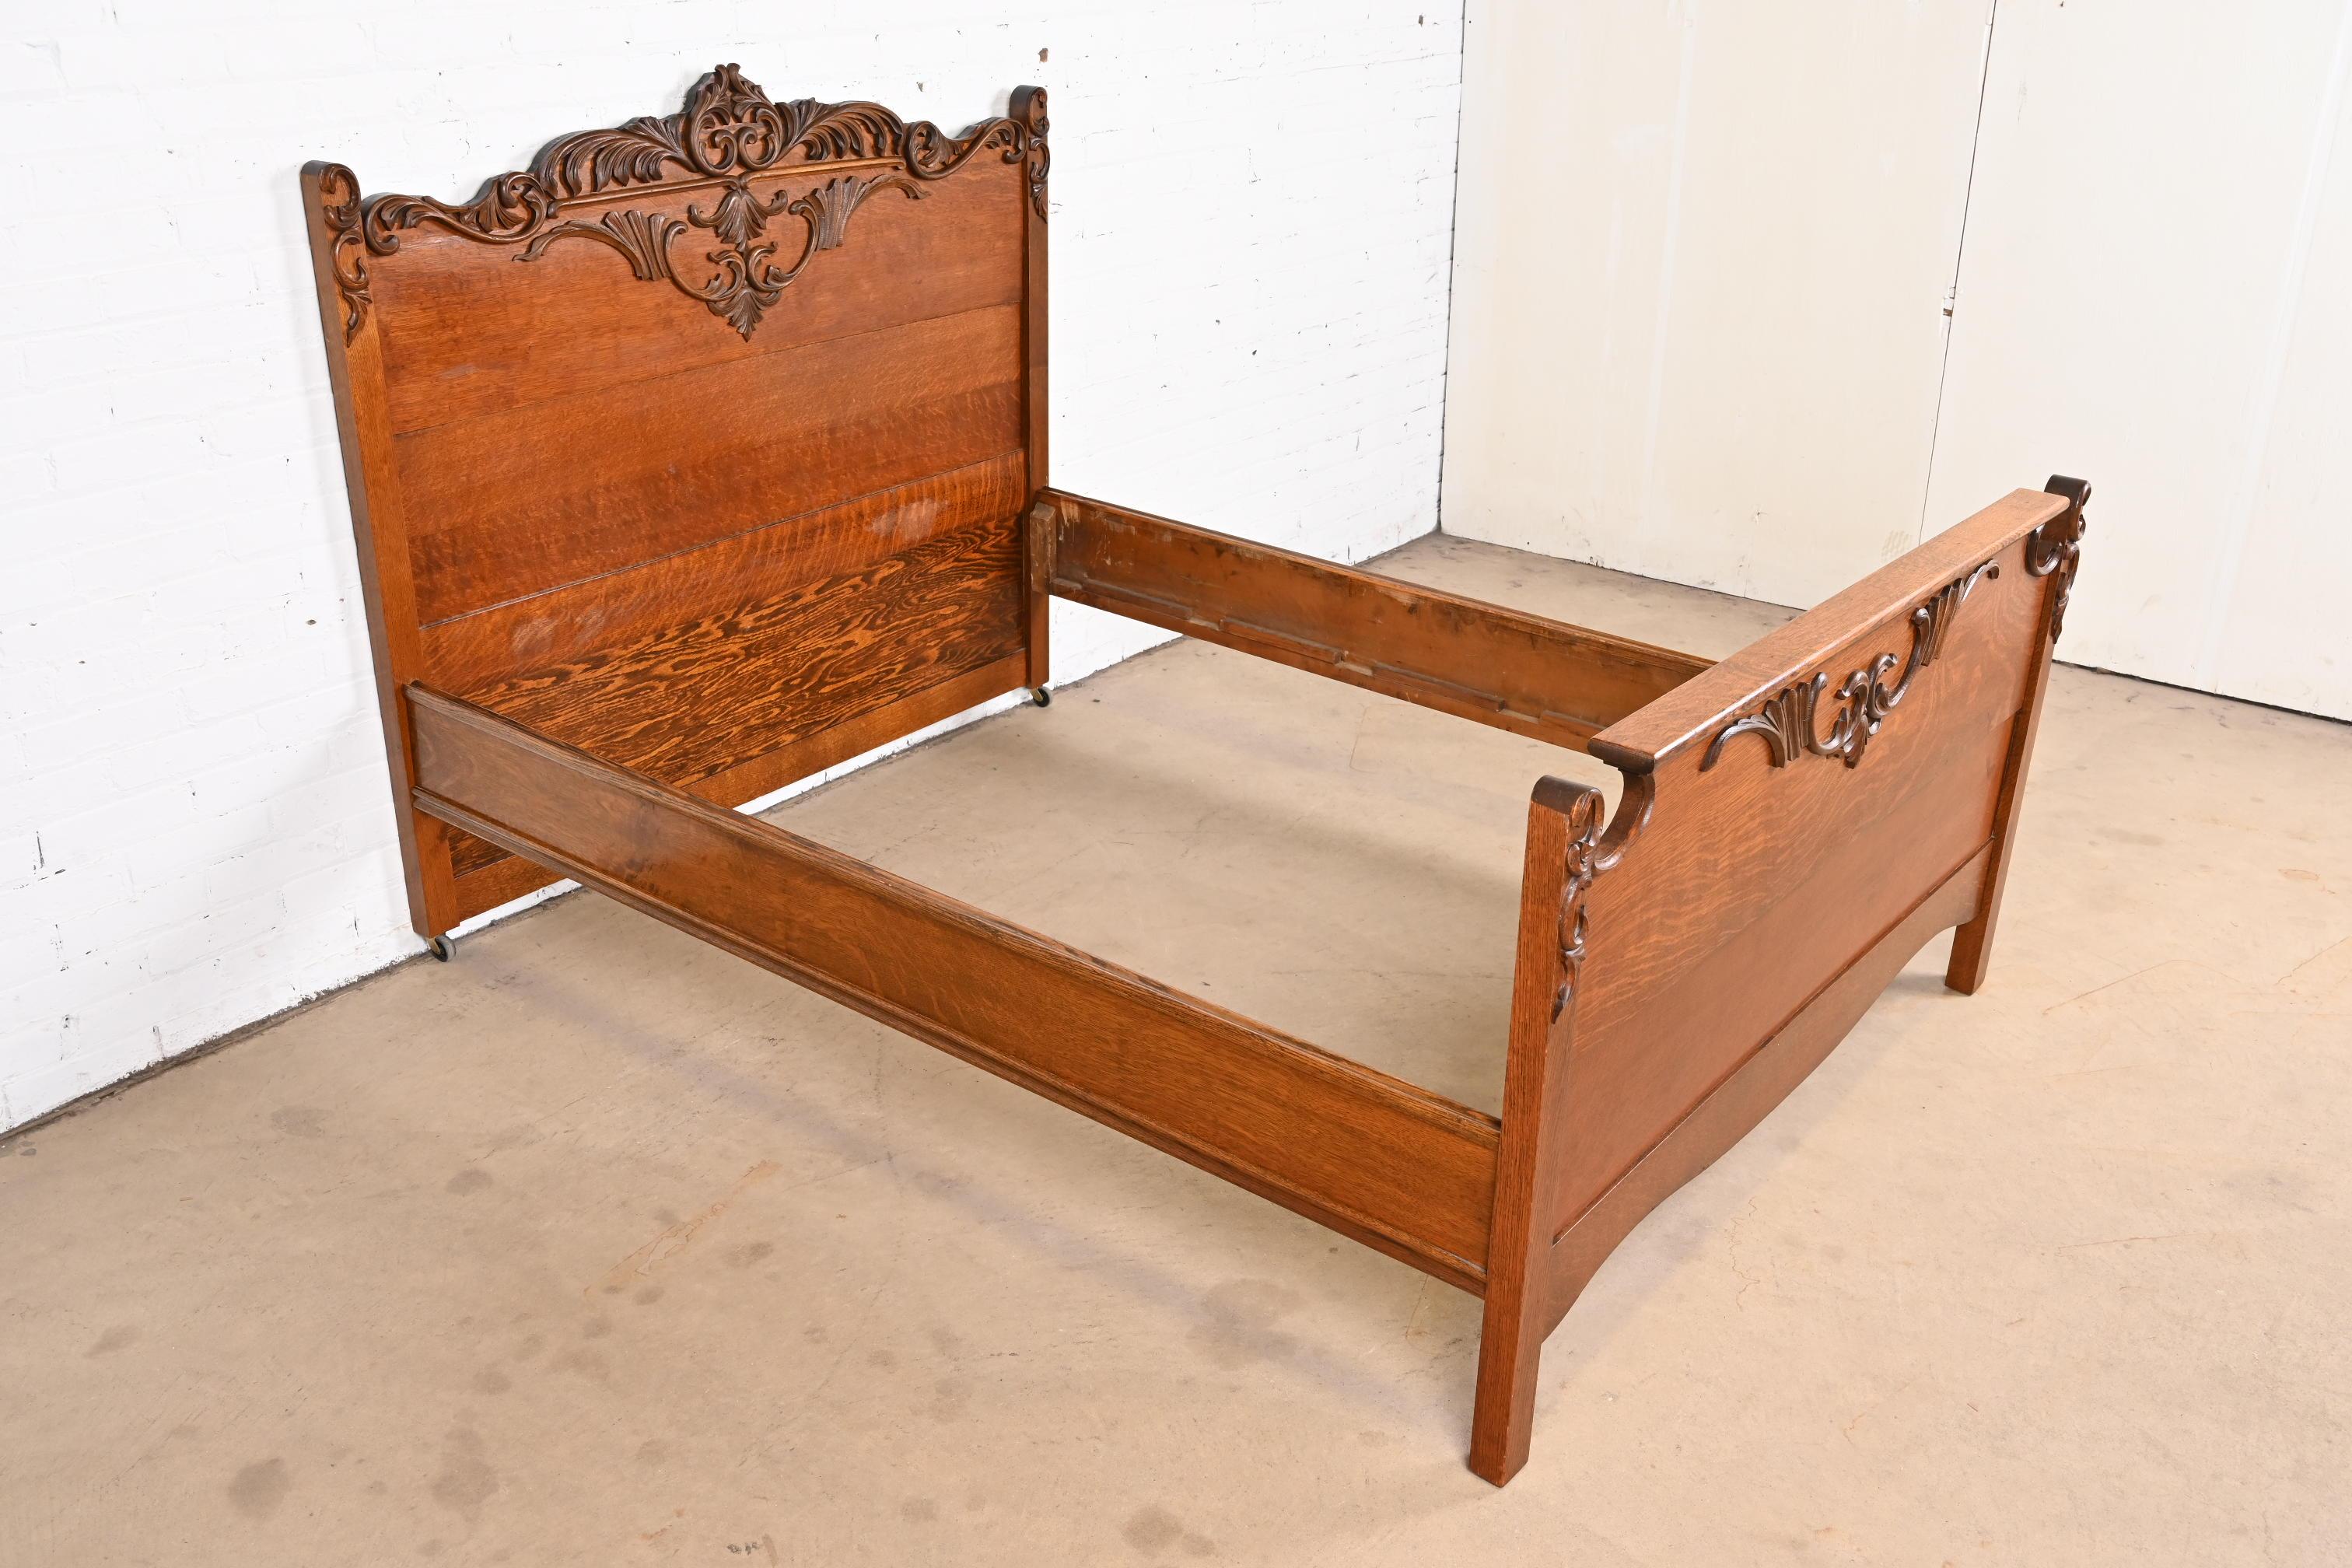 A gorgeous antique Victorian carved oak full size bed frame

USA, Circa 1890s

Measures: 56.5